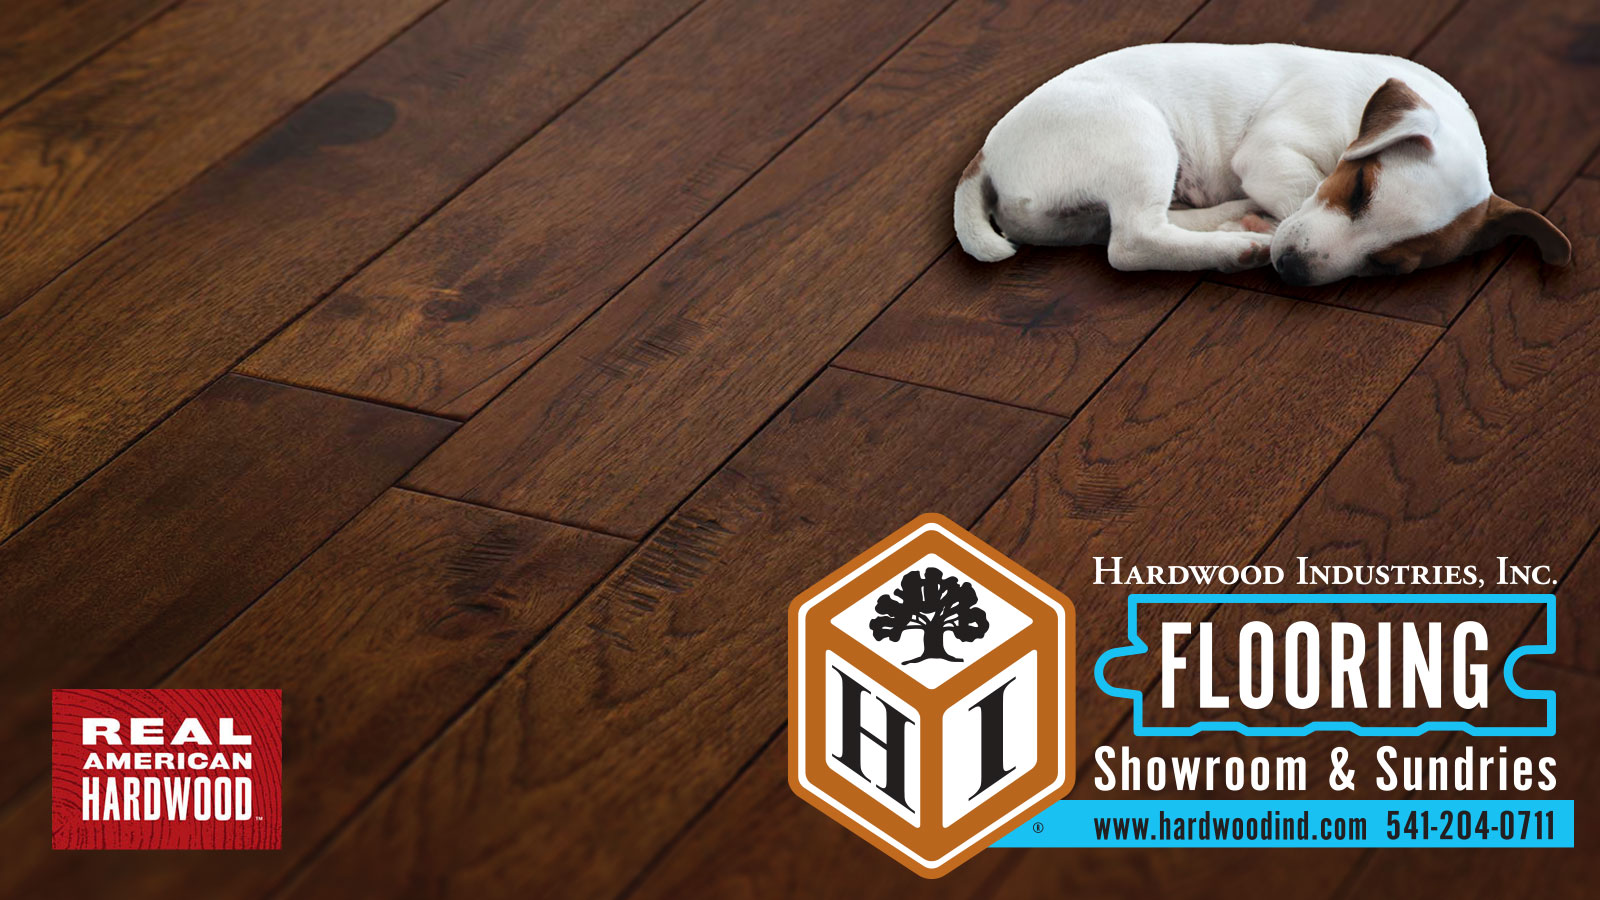 Hardwood Industries' New Flooring and Sundries shoproom in Bend, OR. Give them a visit at 61520 American Lane, Bend, OR 97702. Phone: (541) 389-2236.